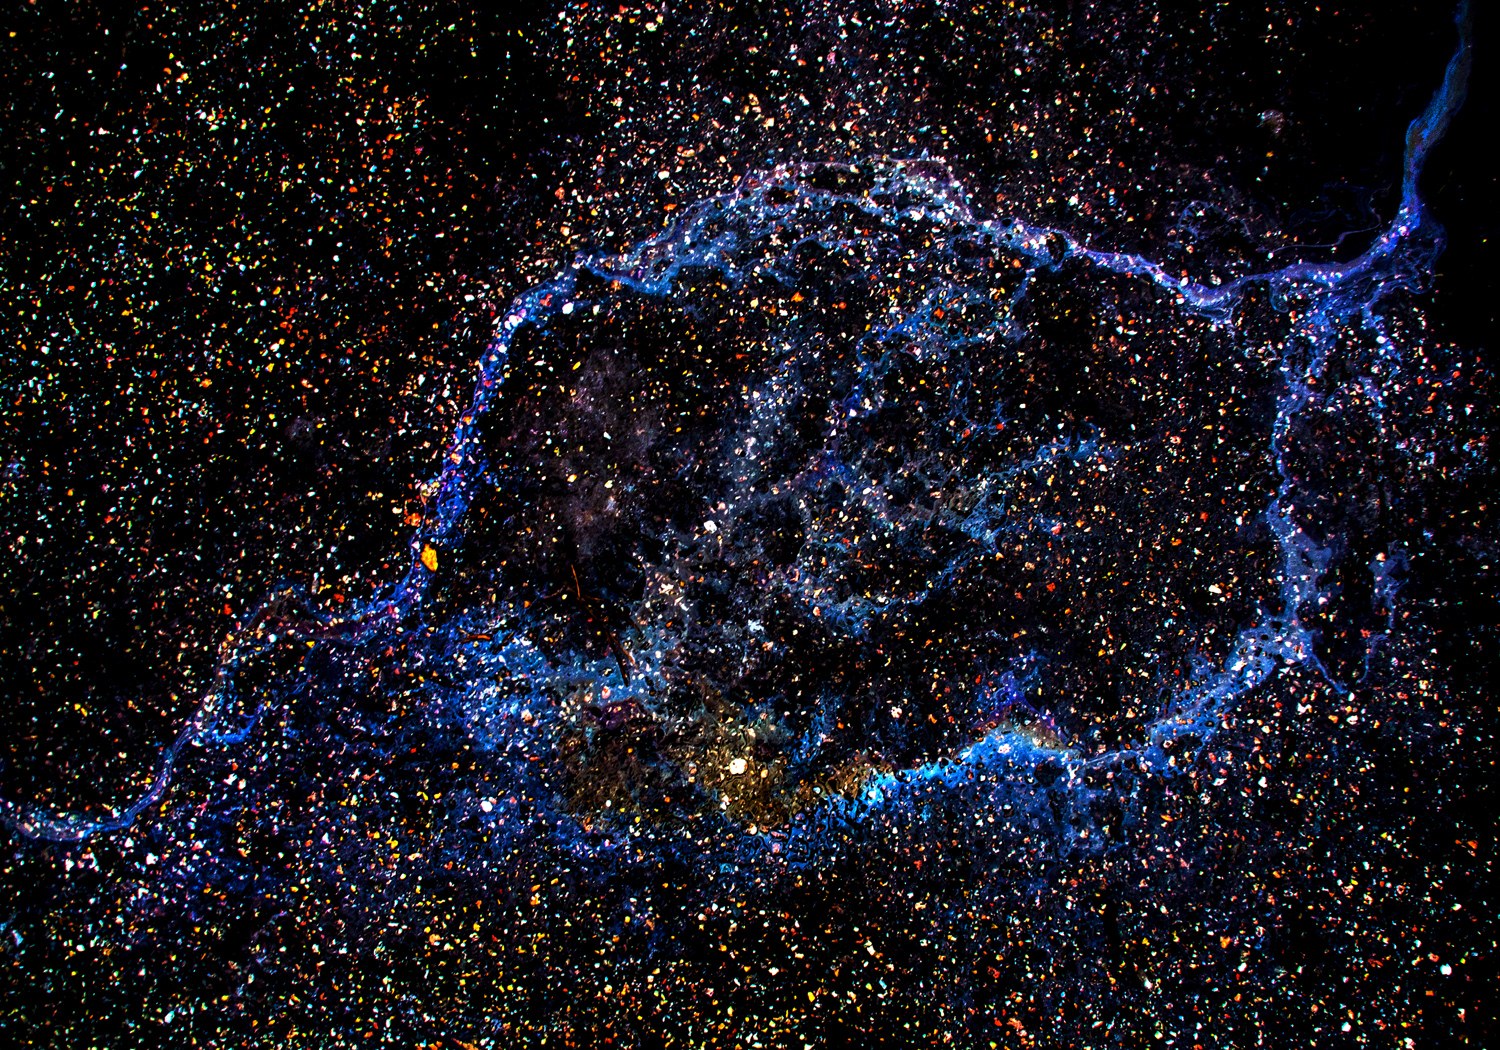 A photograph of Juha Tanhua's oil paintings which look like cosmic scenes from a telescope